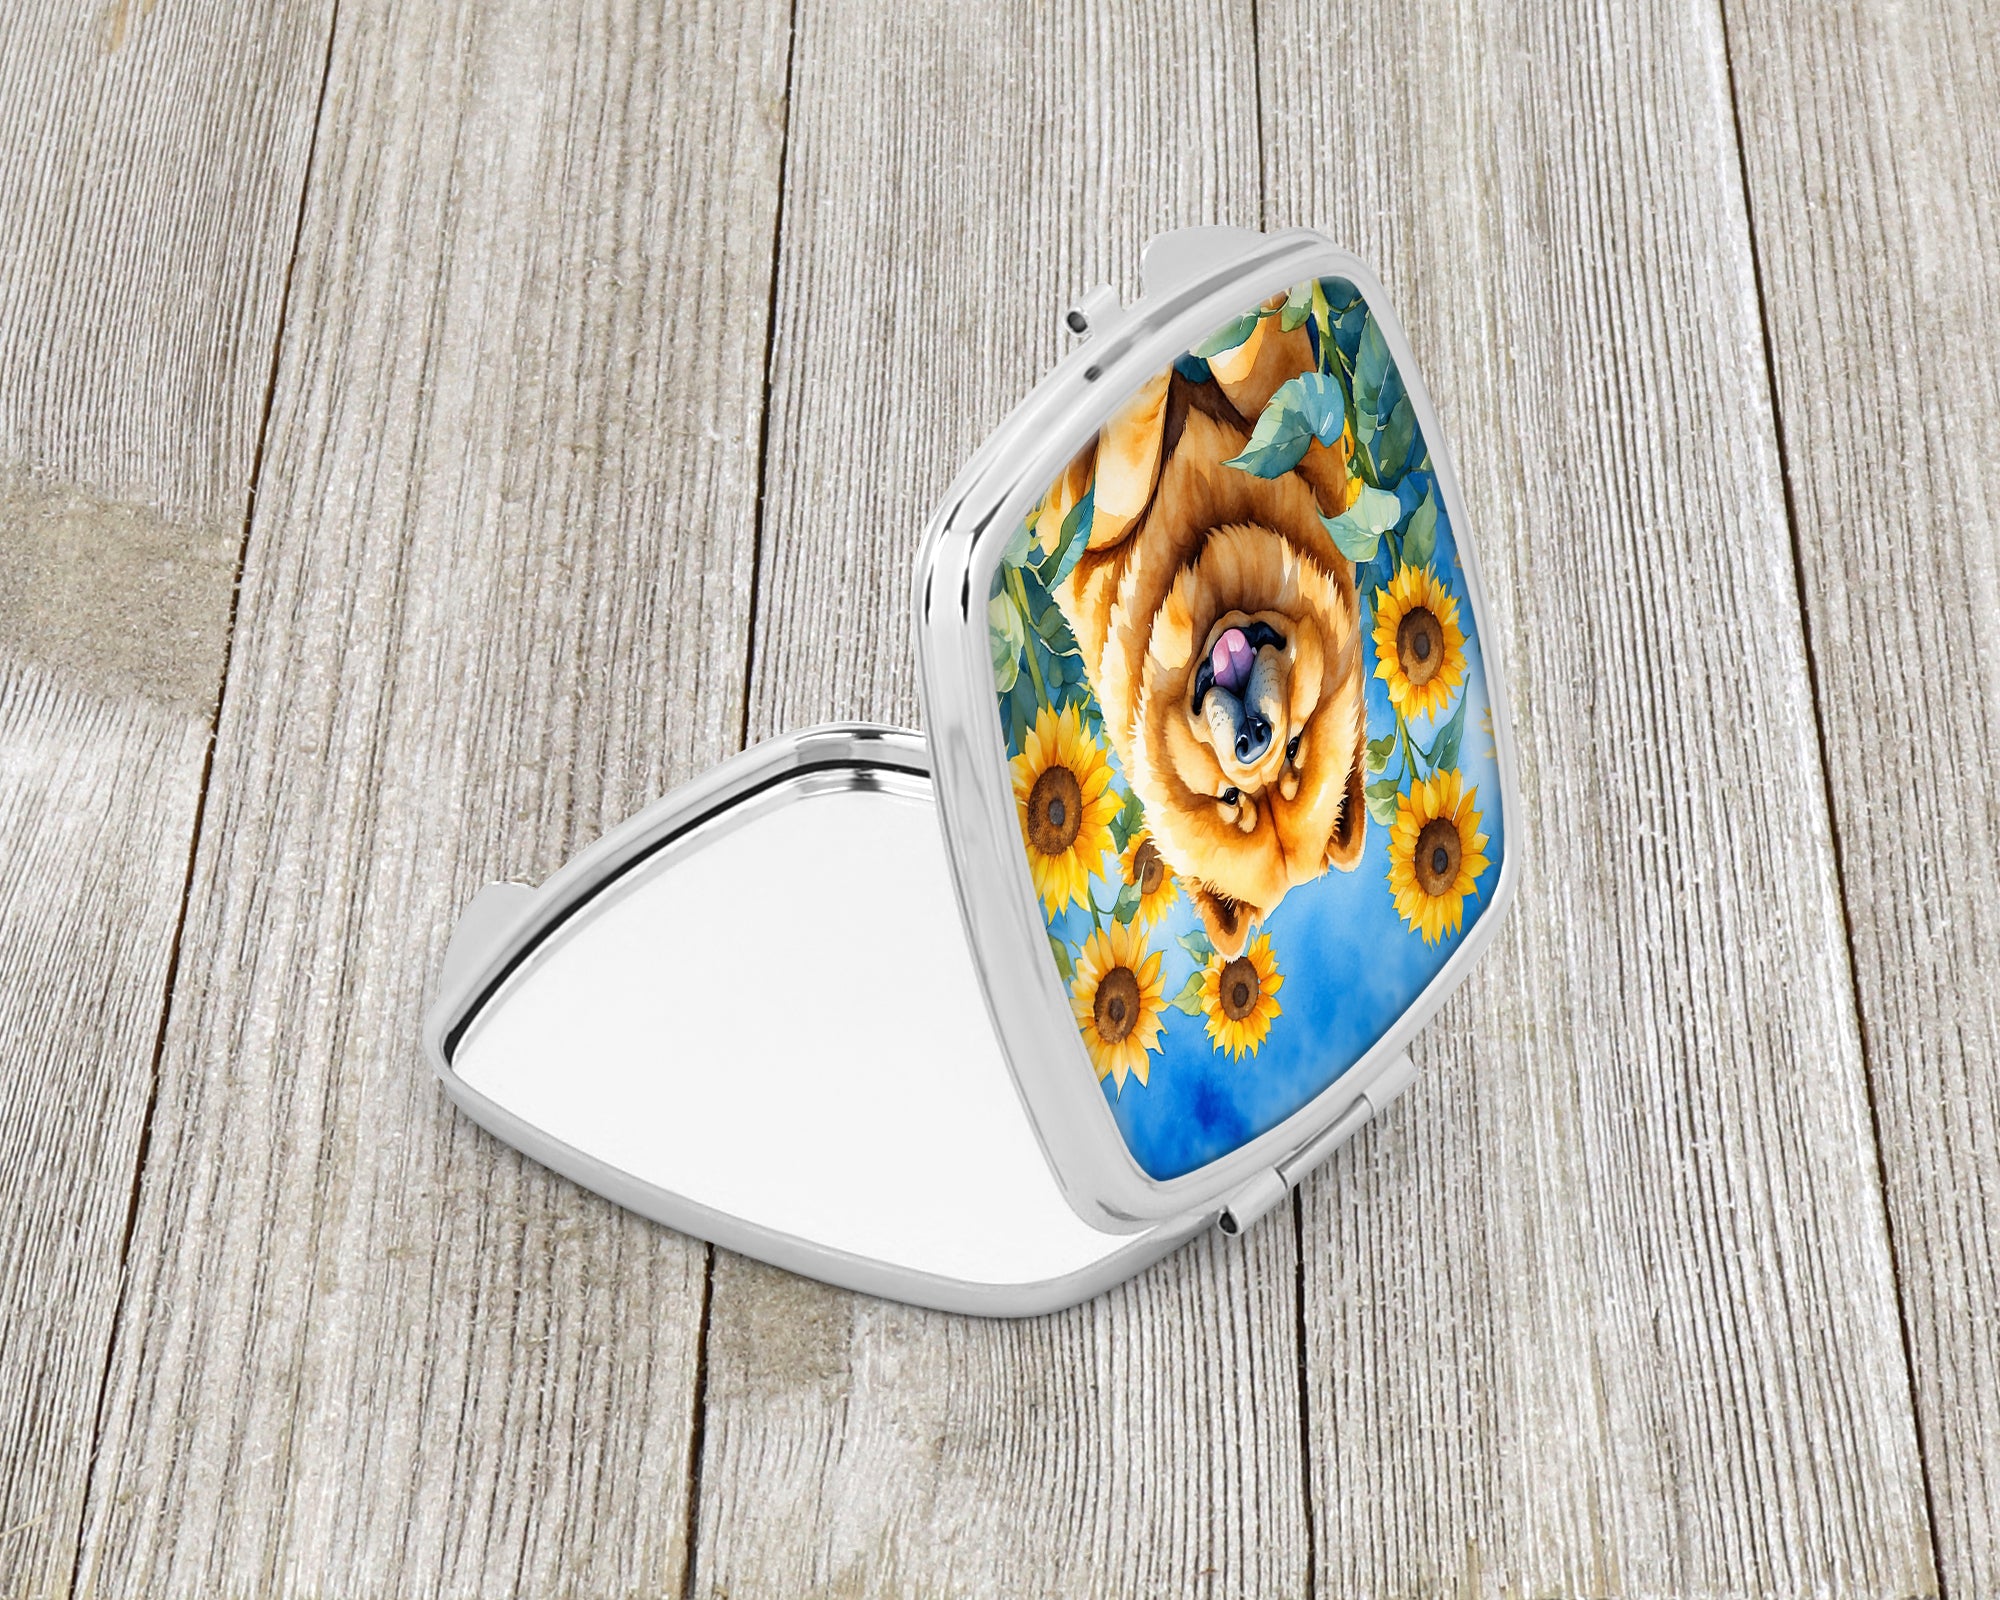 Chow Chow in Sunflowers Compact Mirror